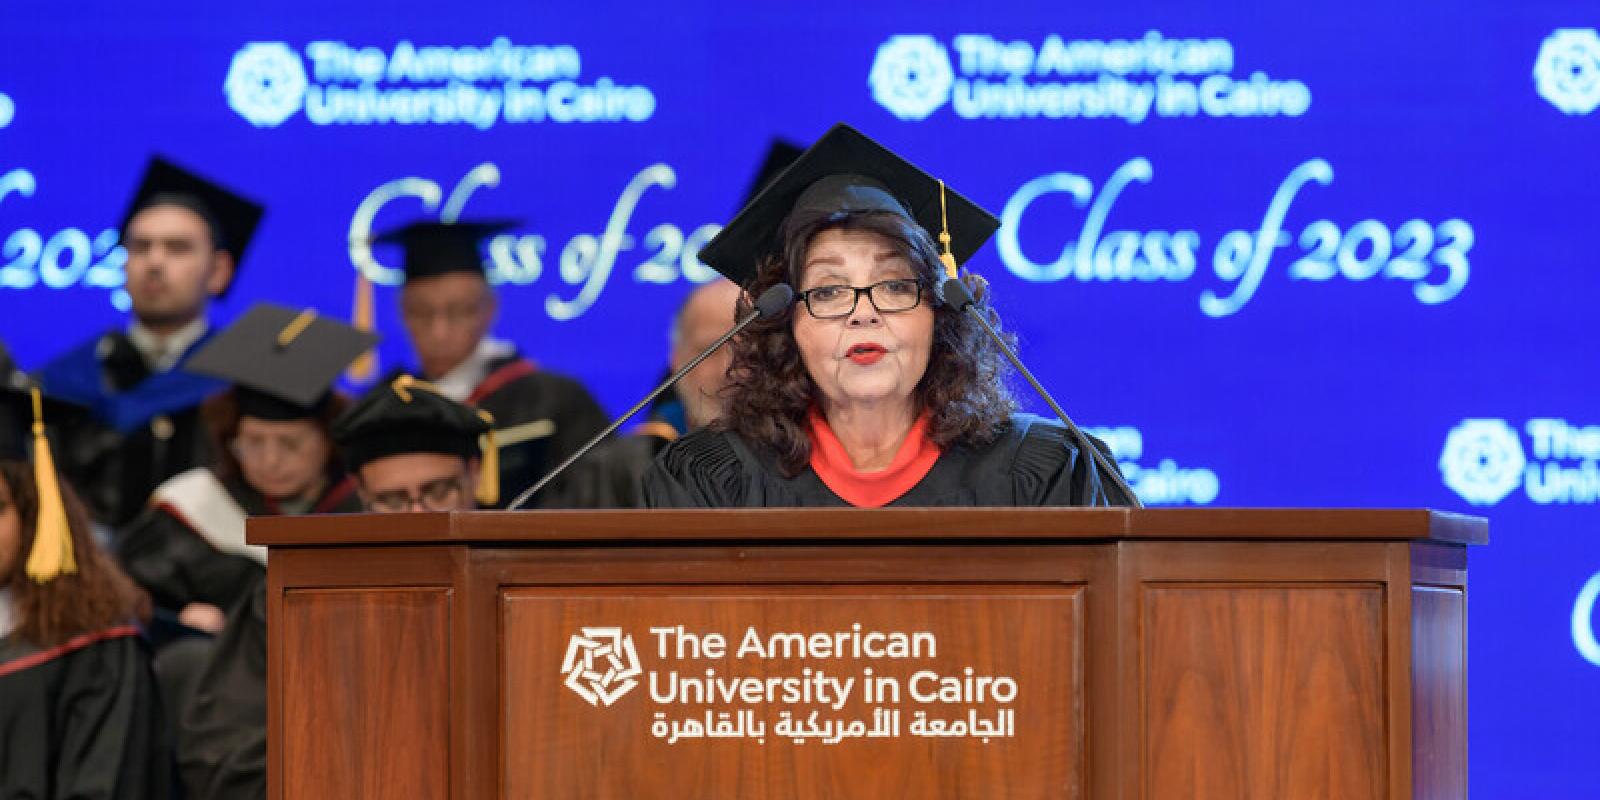 Abdel-Motaal speaks at a podium during commencement while wearing a cap and gown